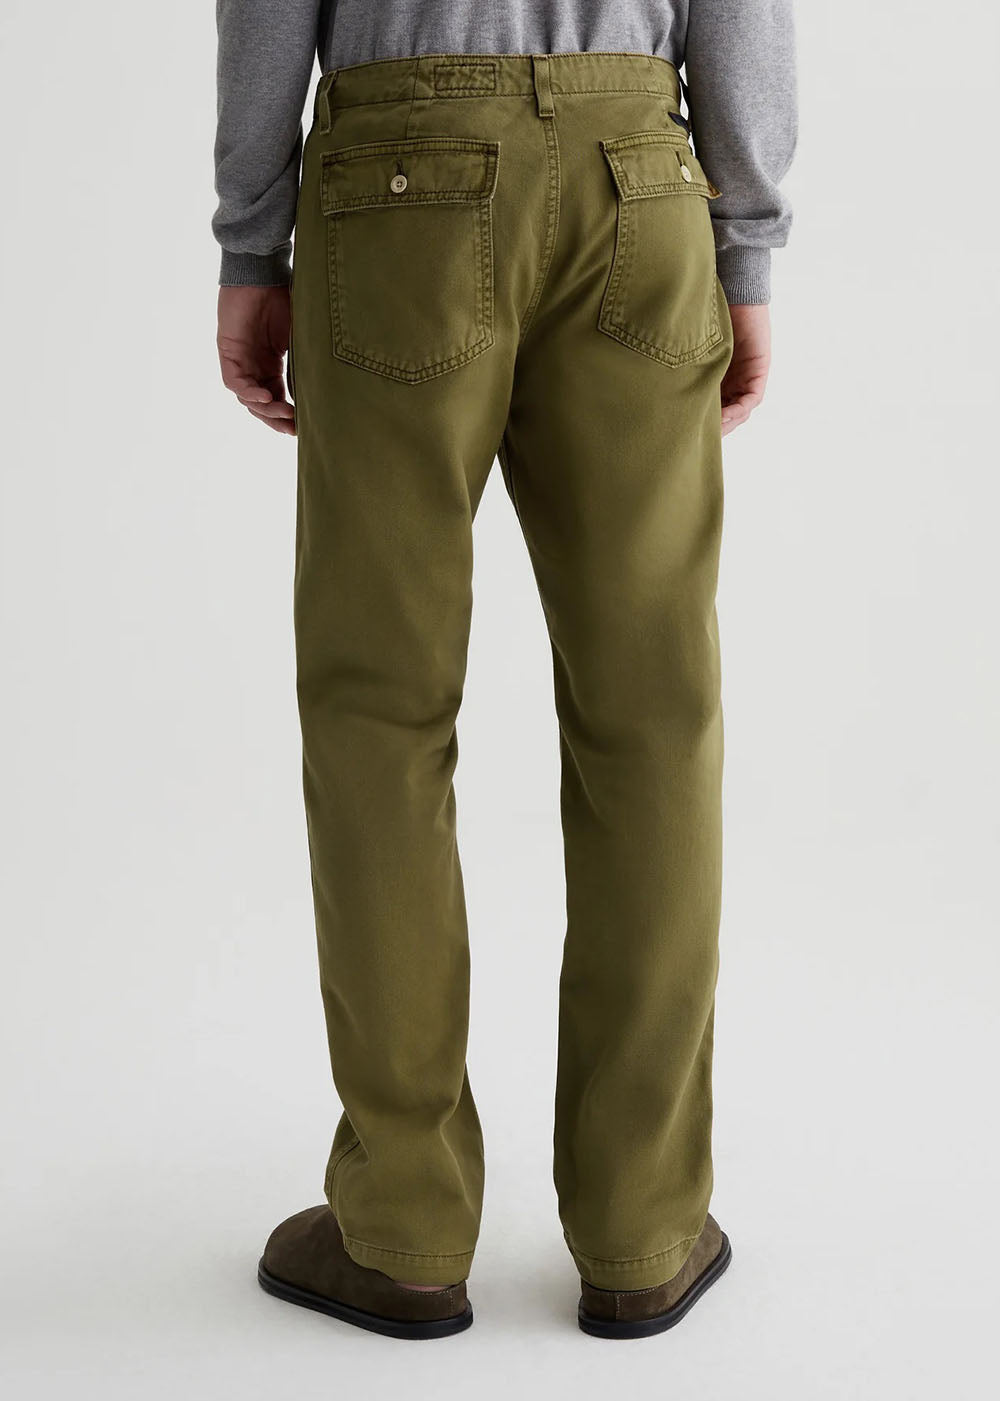 Kace Fatigue Pant - Sulfur Shady Moss - AG Jeans Canada -  Danali - 1E43SWSSLSYMS